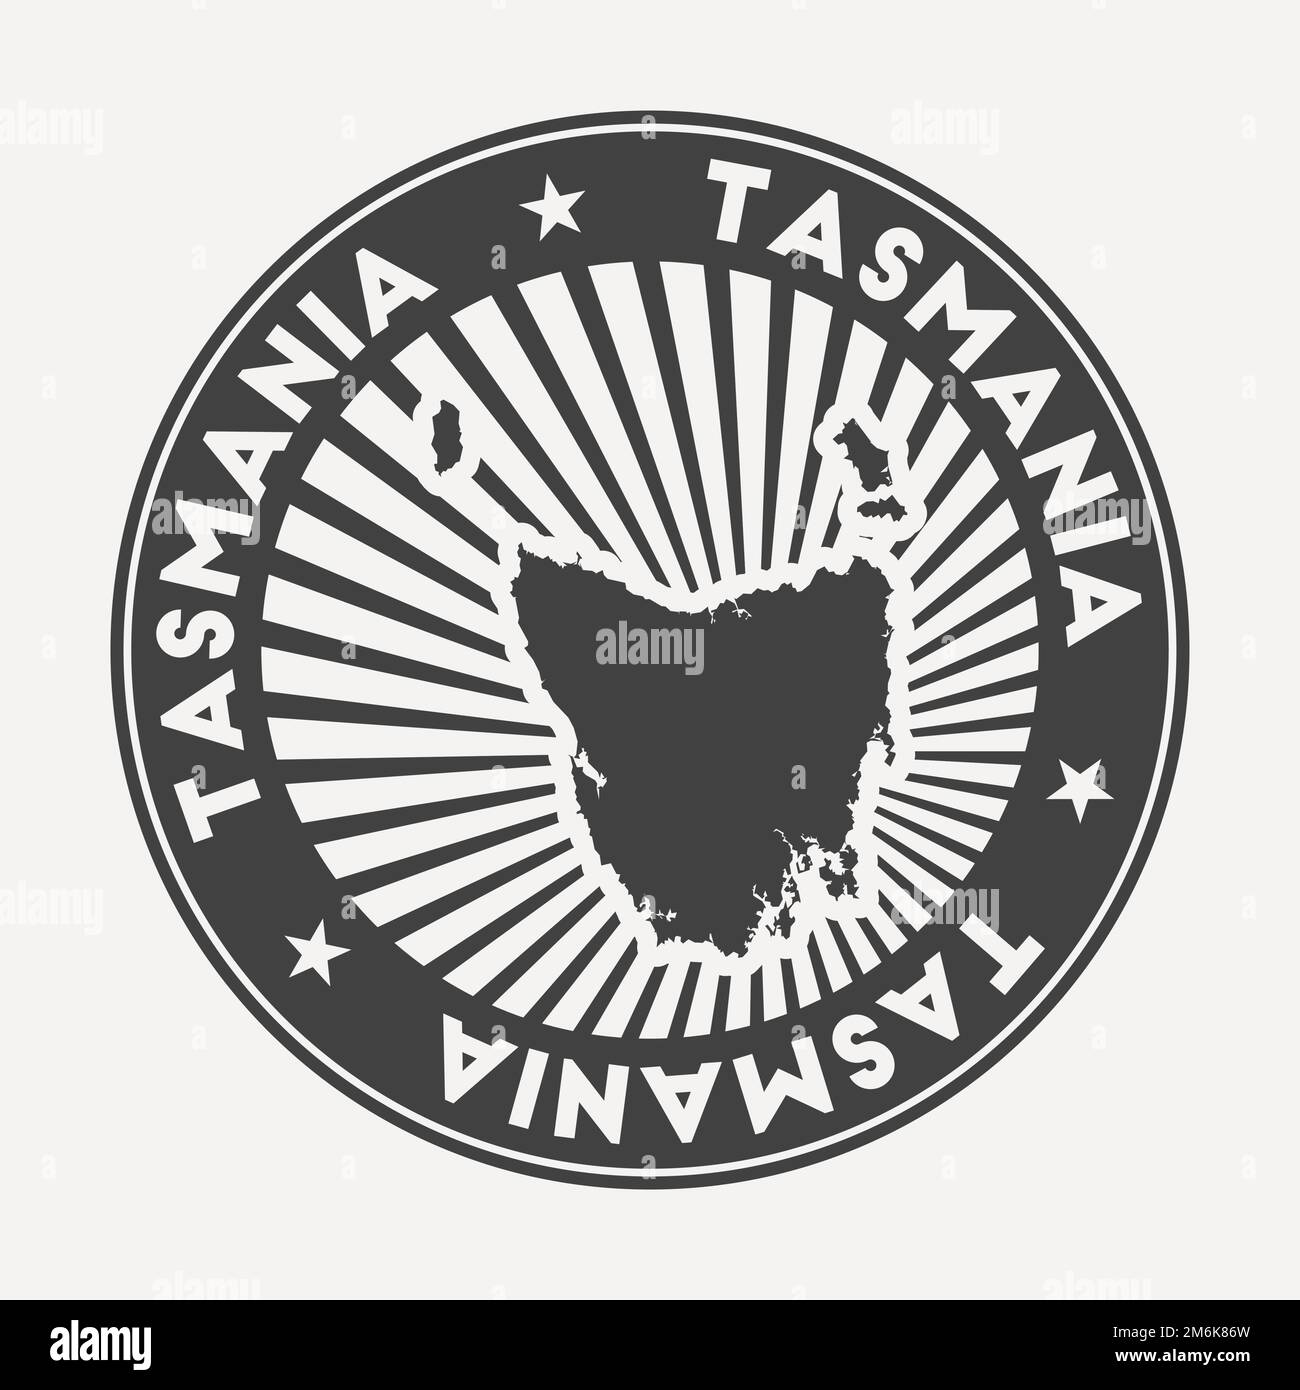 Tasmania round logo. Vintage travel badge with the circular name and map of island, vector illustration. Can be used as insignia, logotype, label, sti Stock Vector